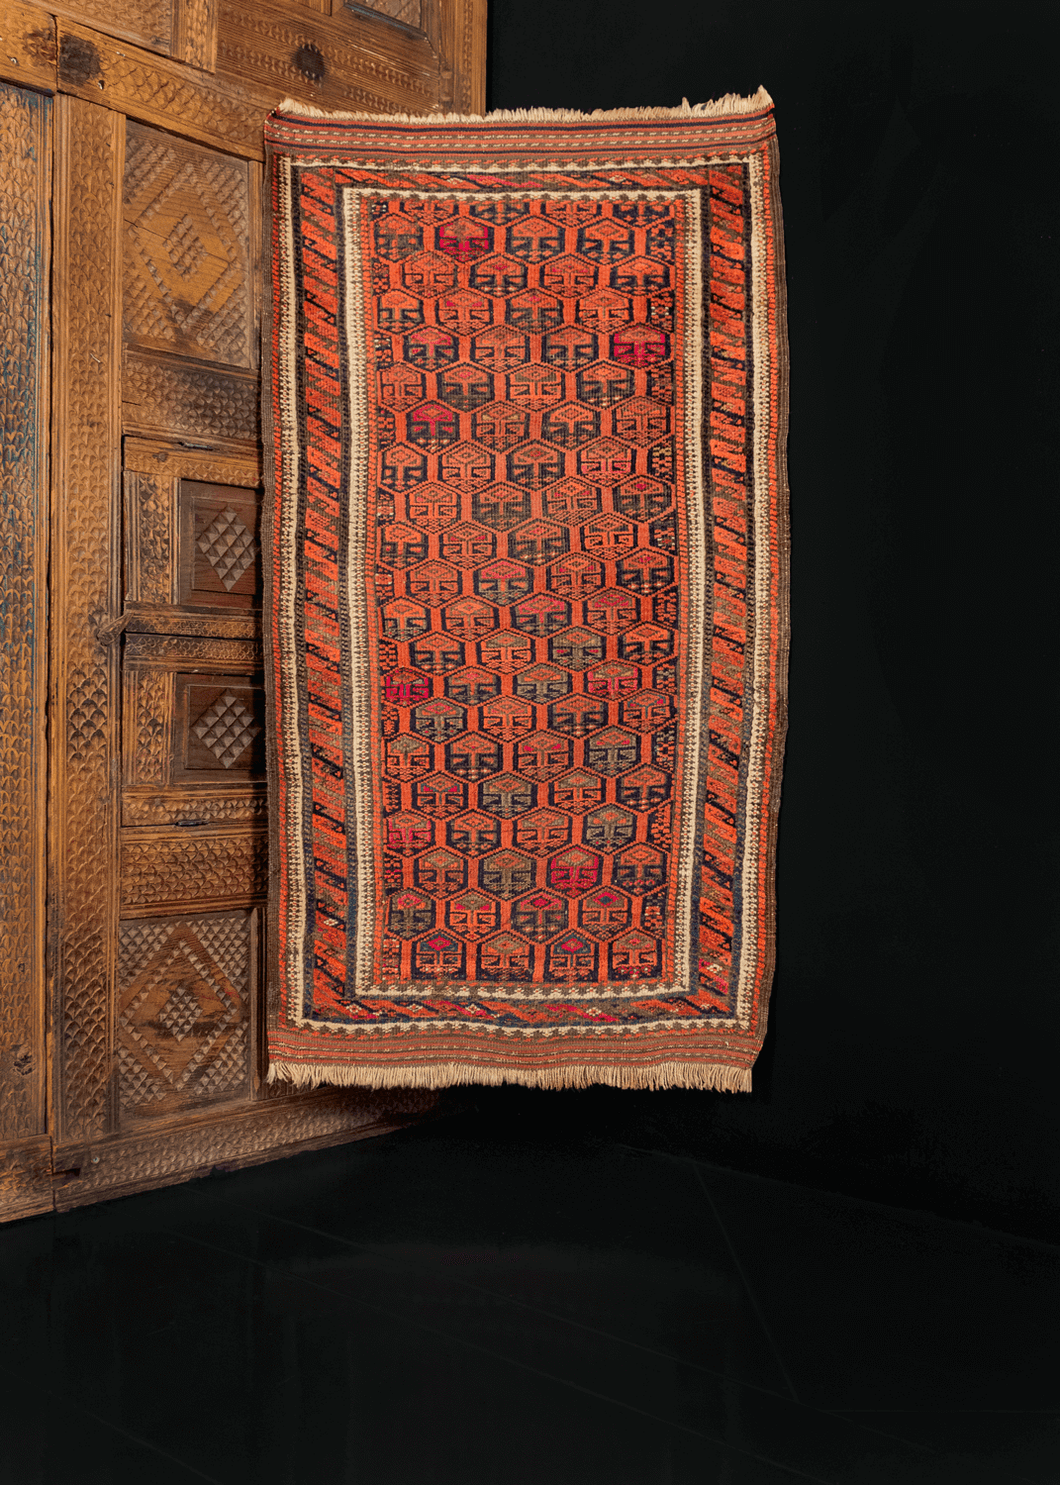 Baluch rug from the second quarter of 20th century with diagonal repeat design in reds, oranges, and browns with pops of fuchsia